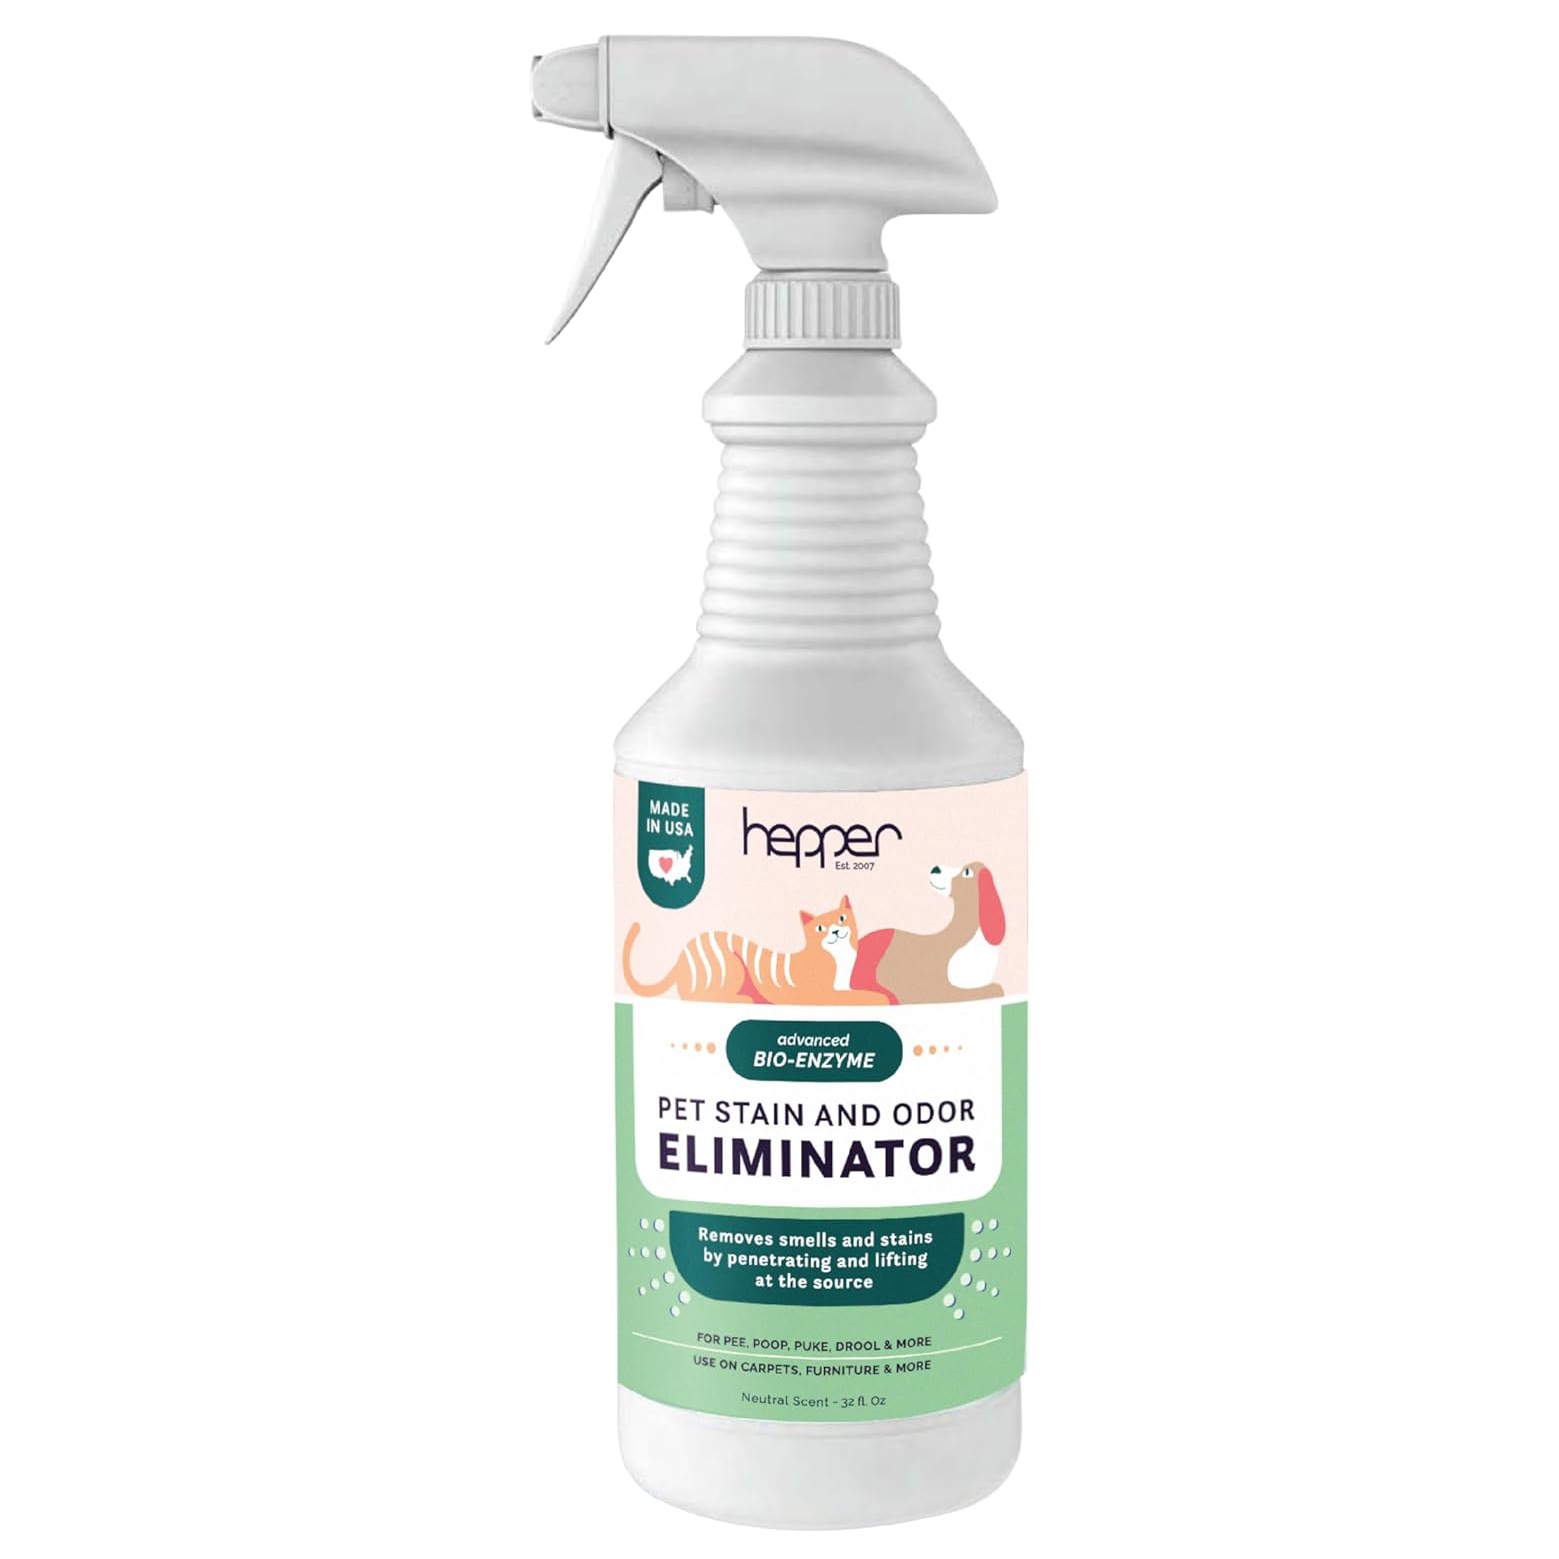 Hepper Advanced Bio-Enzyme Pet Stain and Odor Eliminator Spray